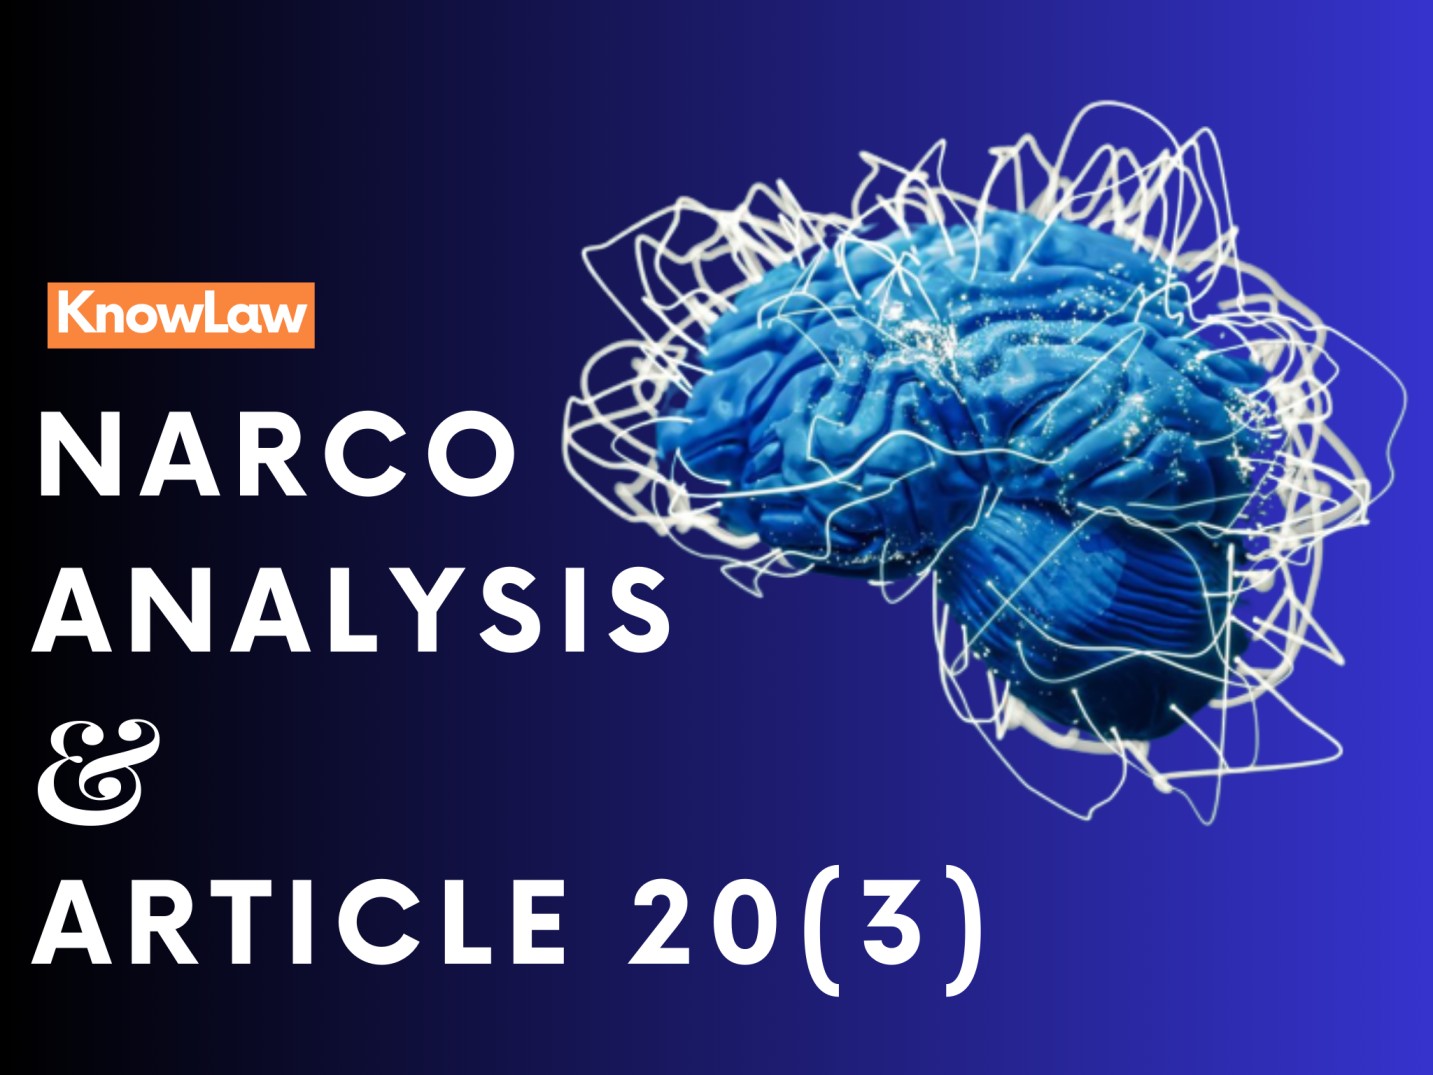 Is Narco-Analysis a threat to the right granted by Article 20(3)?